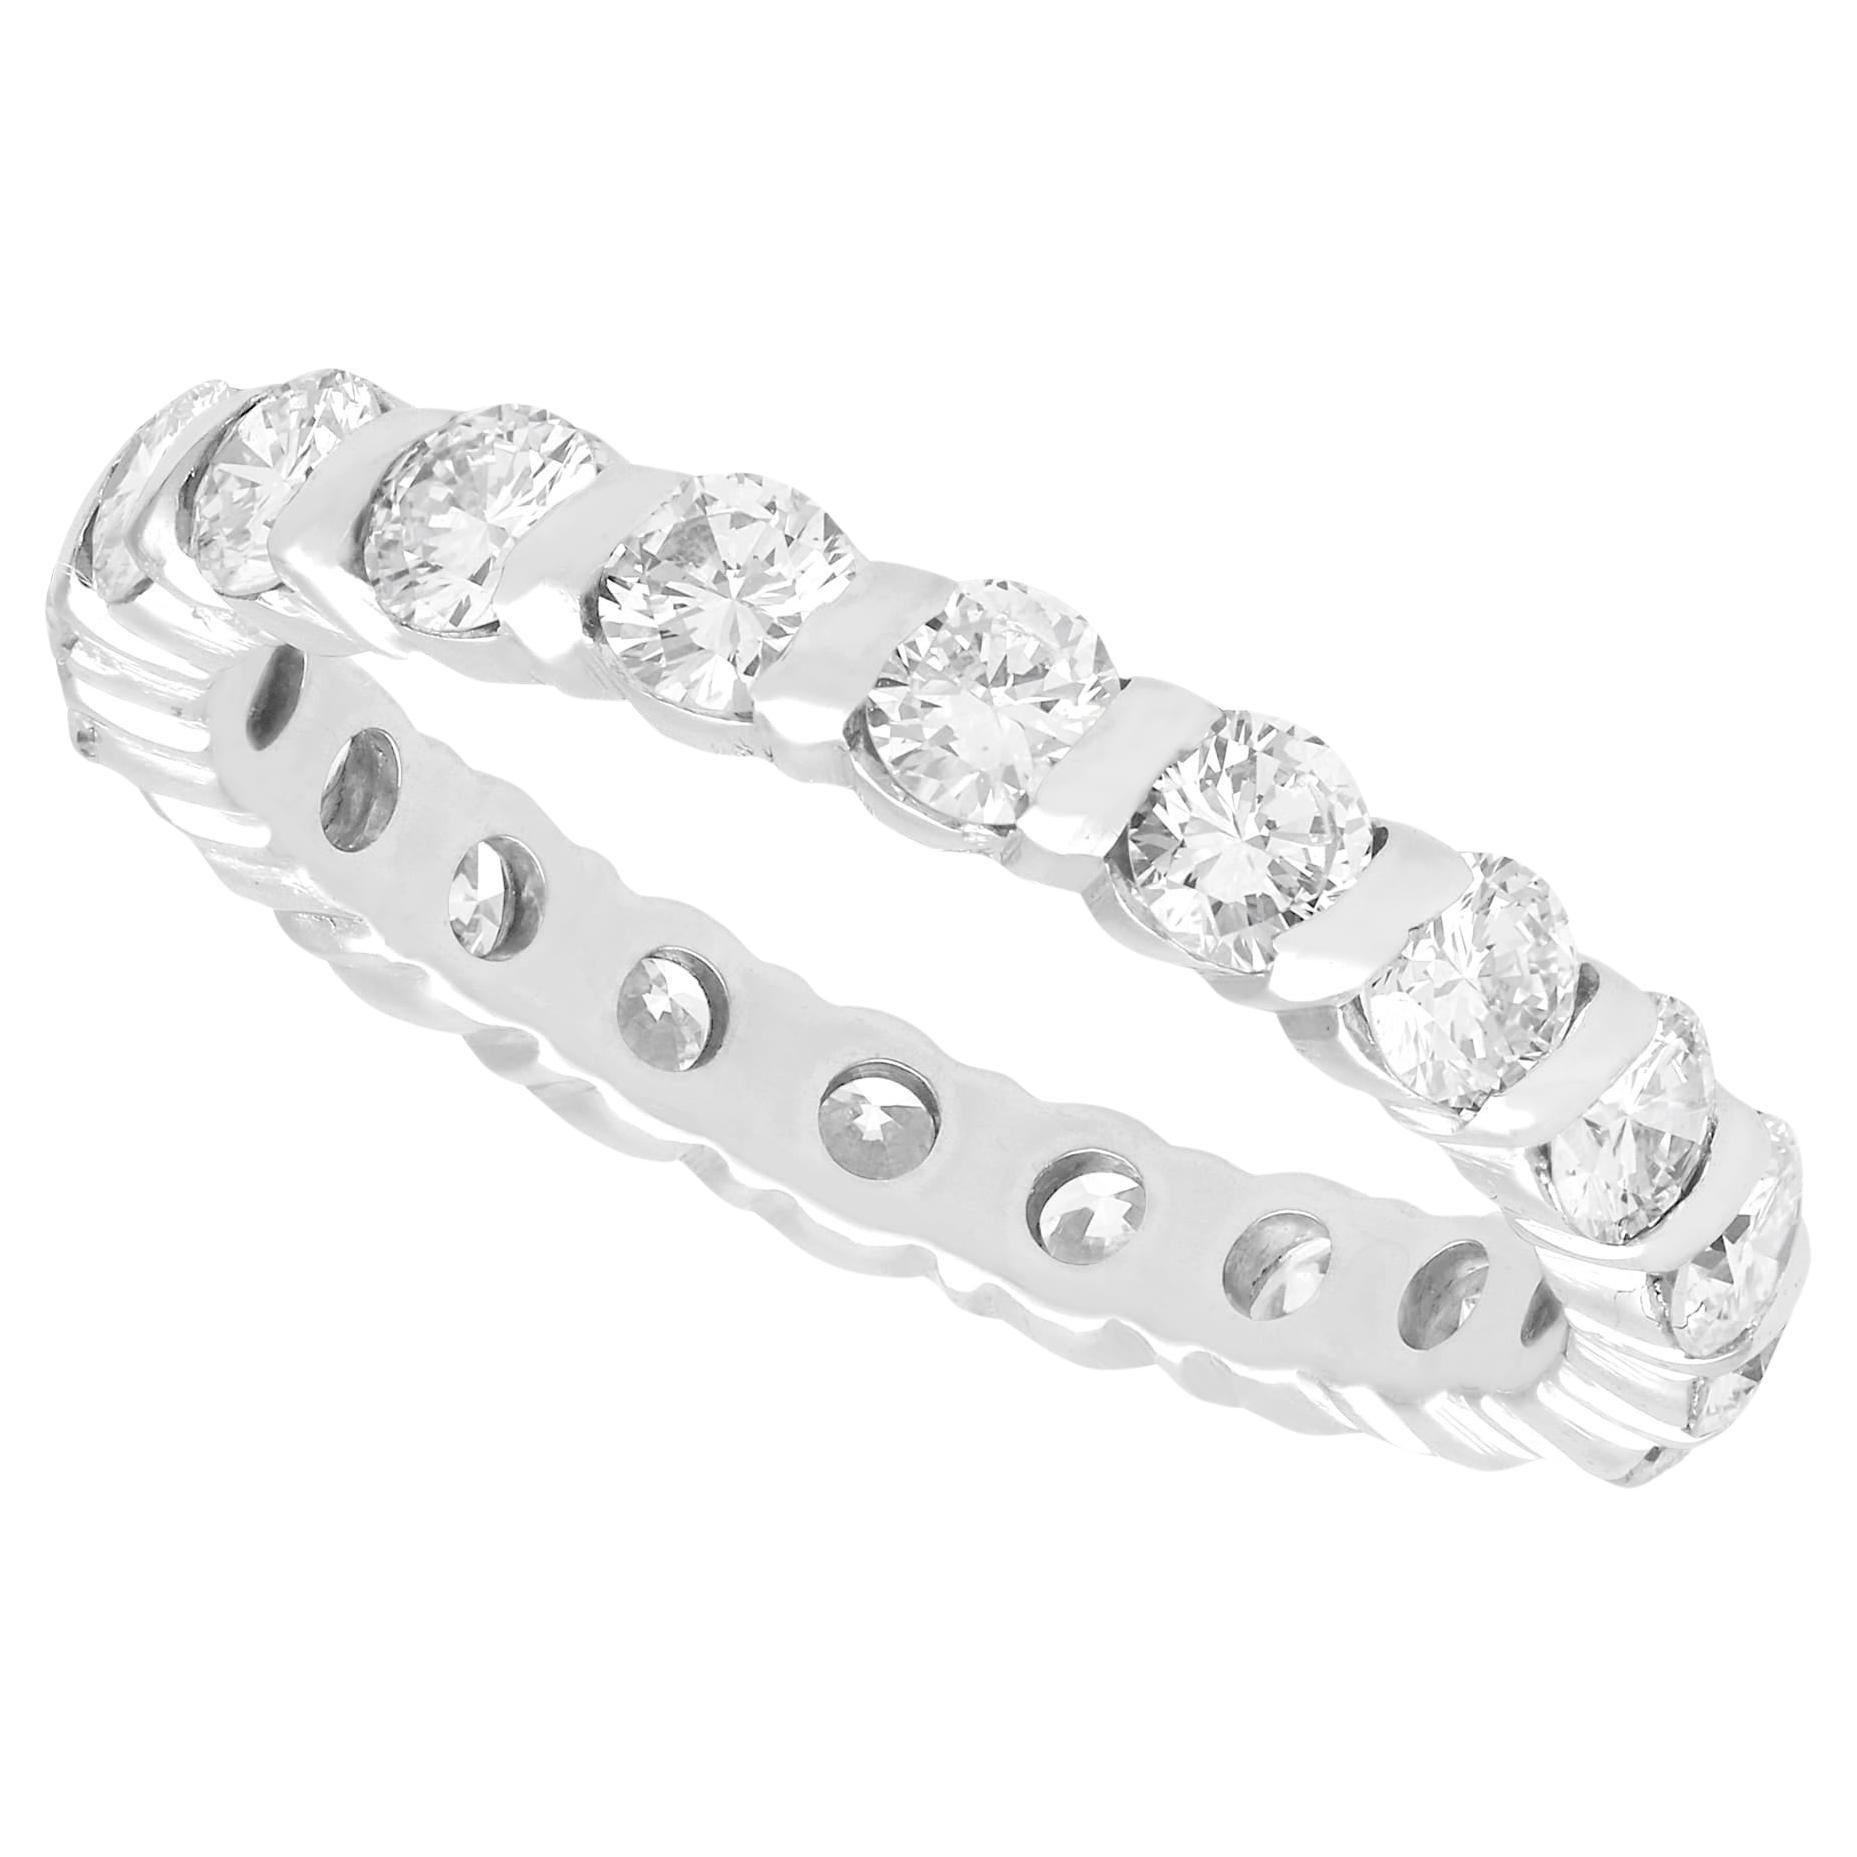 French 1.88 Carat Diamond and White Gold Full Eternity Ring Circa 1980